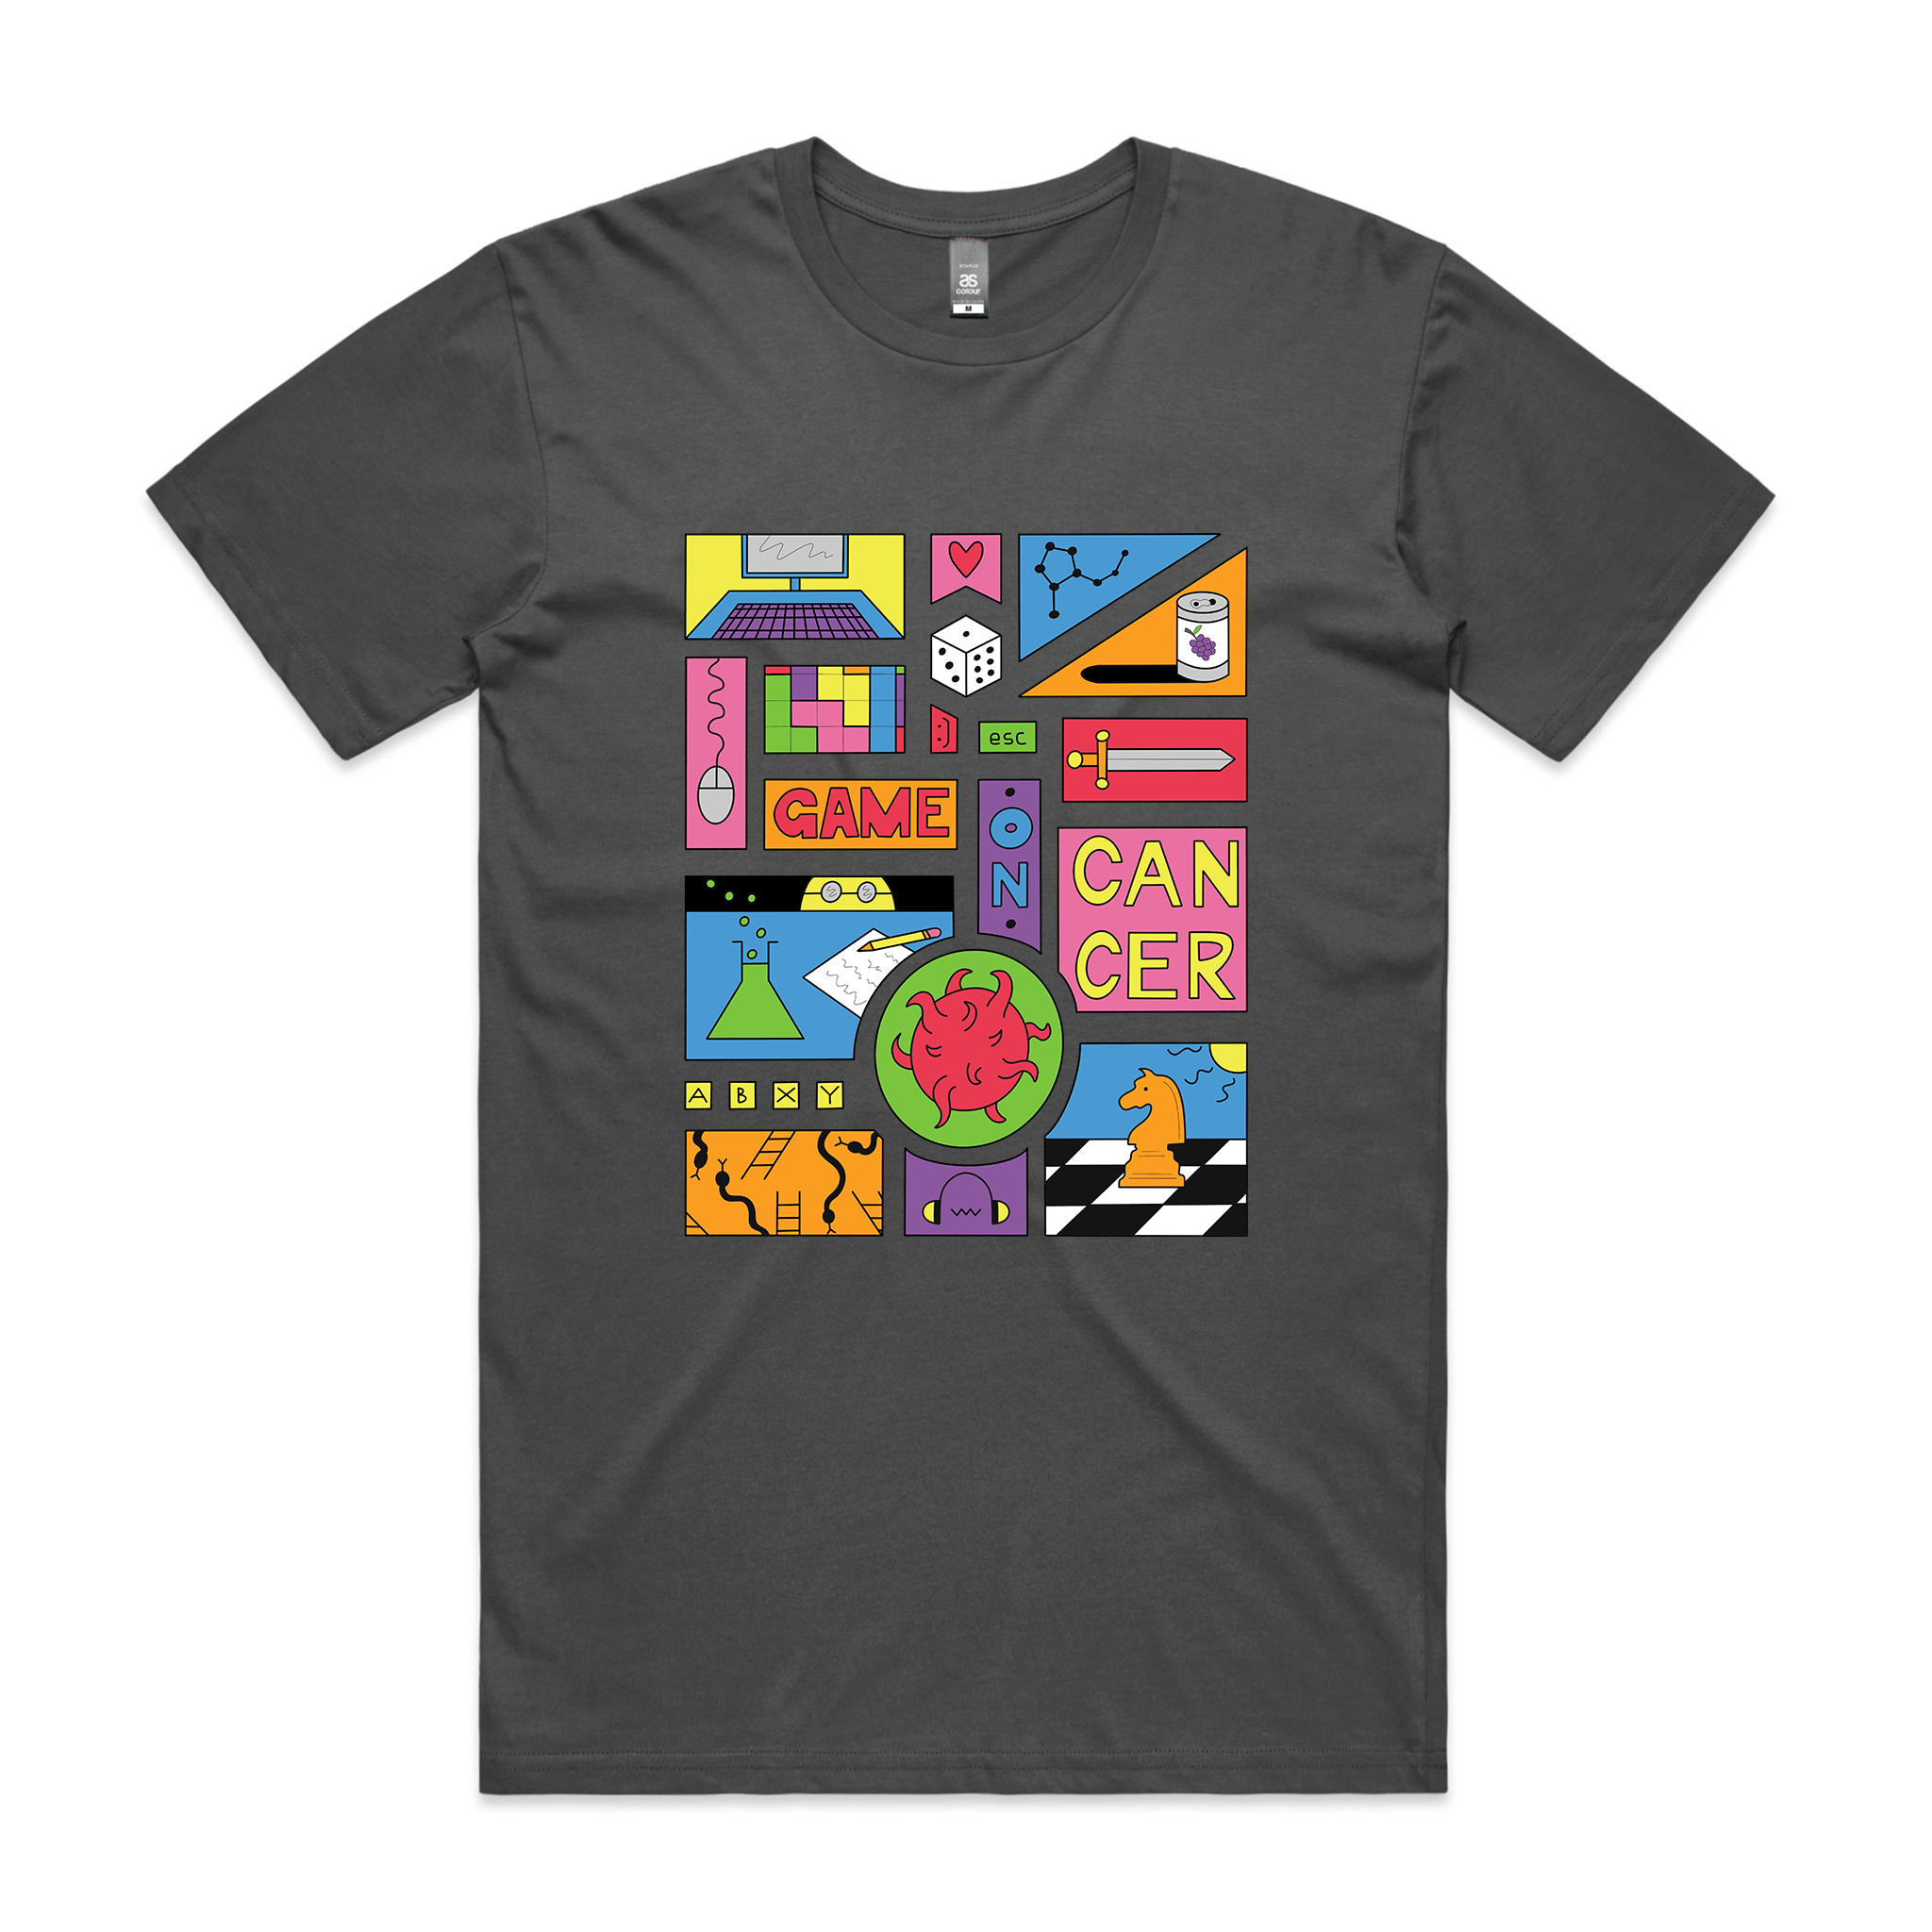 Science Meets Gaming Charity Tee